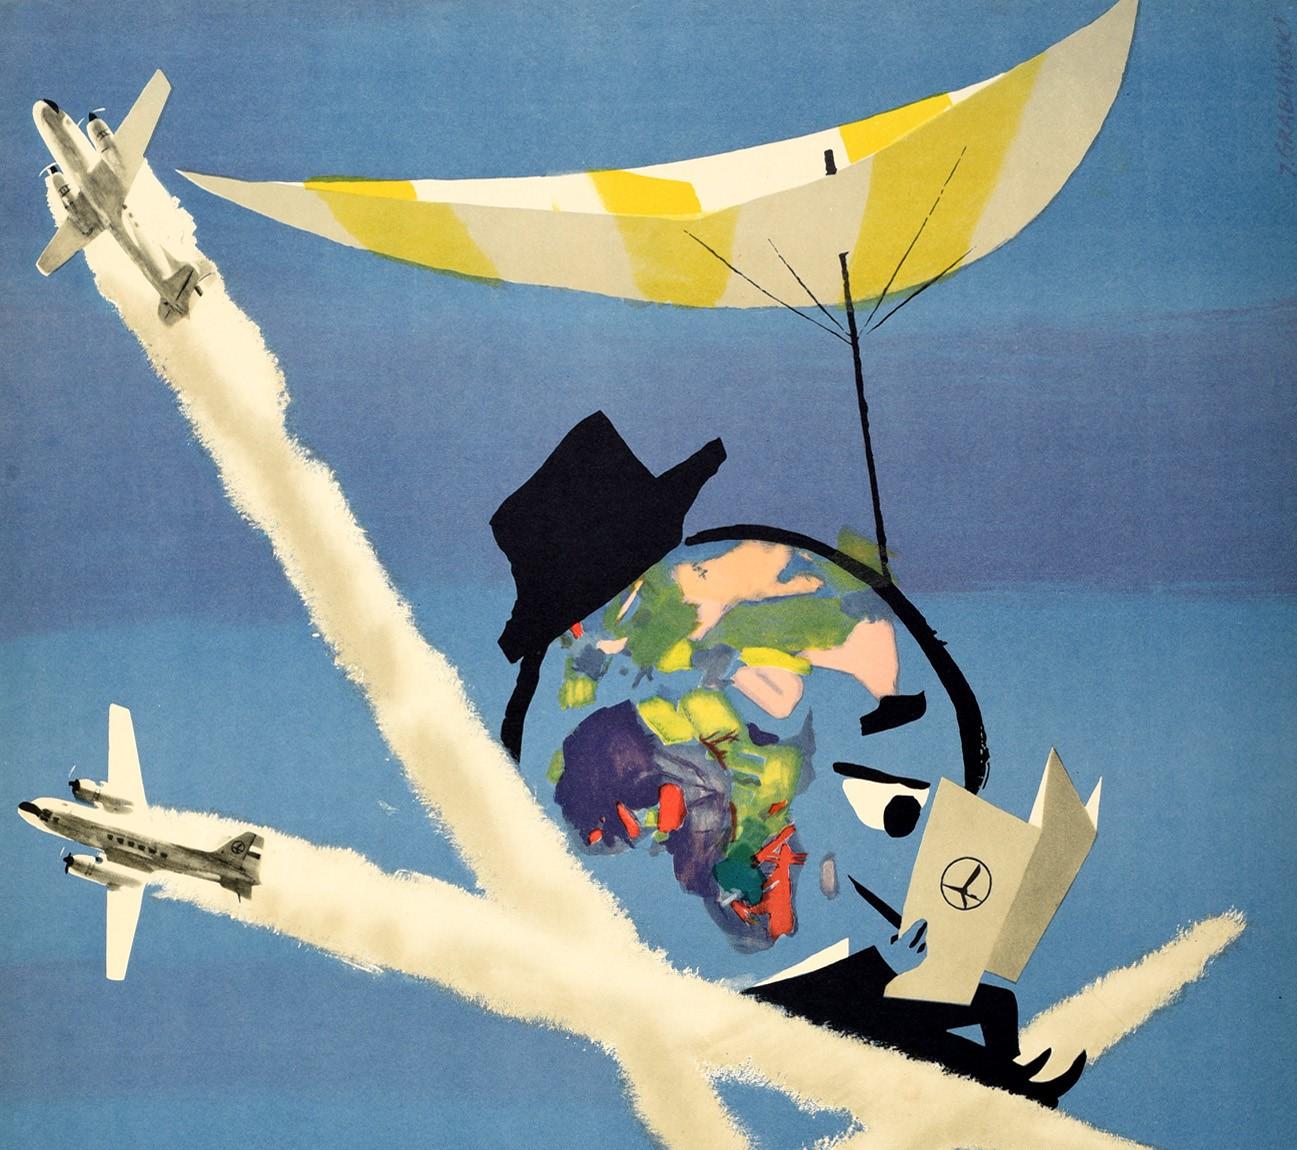 Original vintage travel advertising poster for Polish Airlines LOT (Polskie Linie Lotnicze; founded 1929) featuring a fun design showing three planes with their white trails forming a deck chair in the blue sky being used by a smiling globe of the